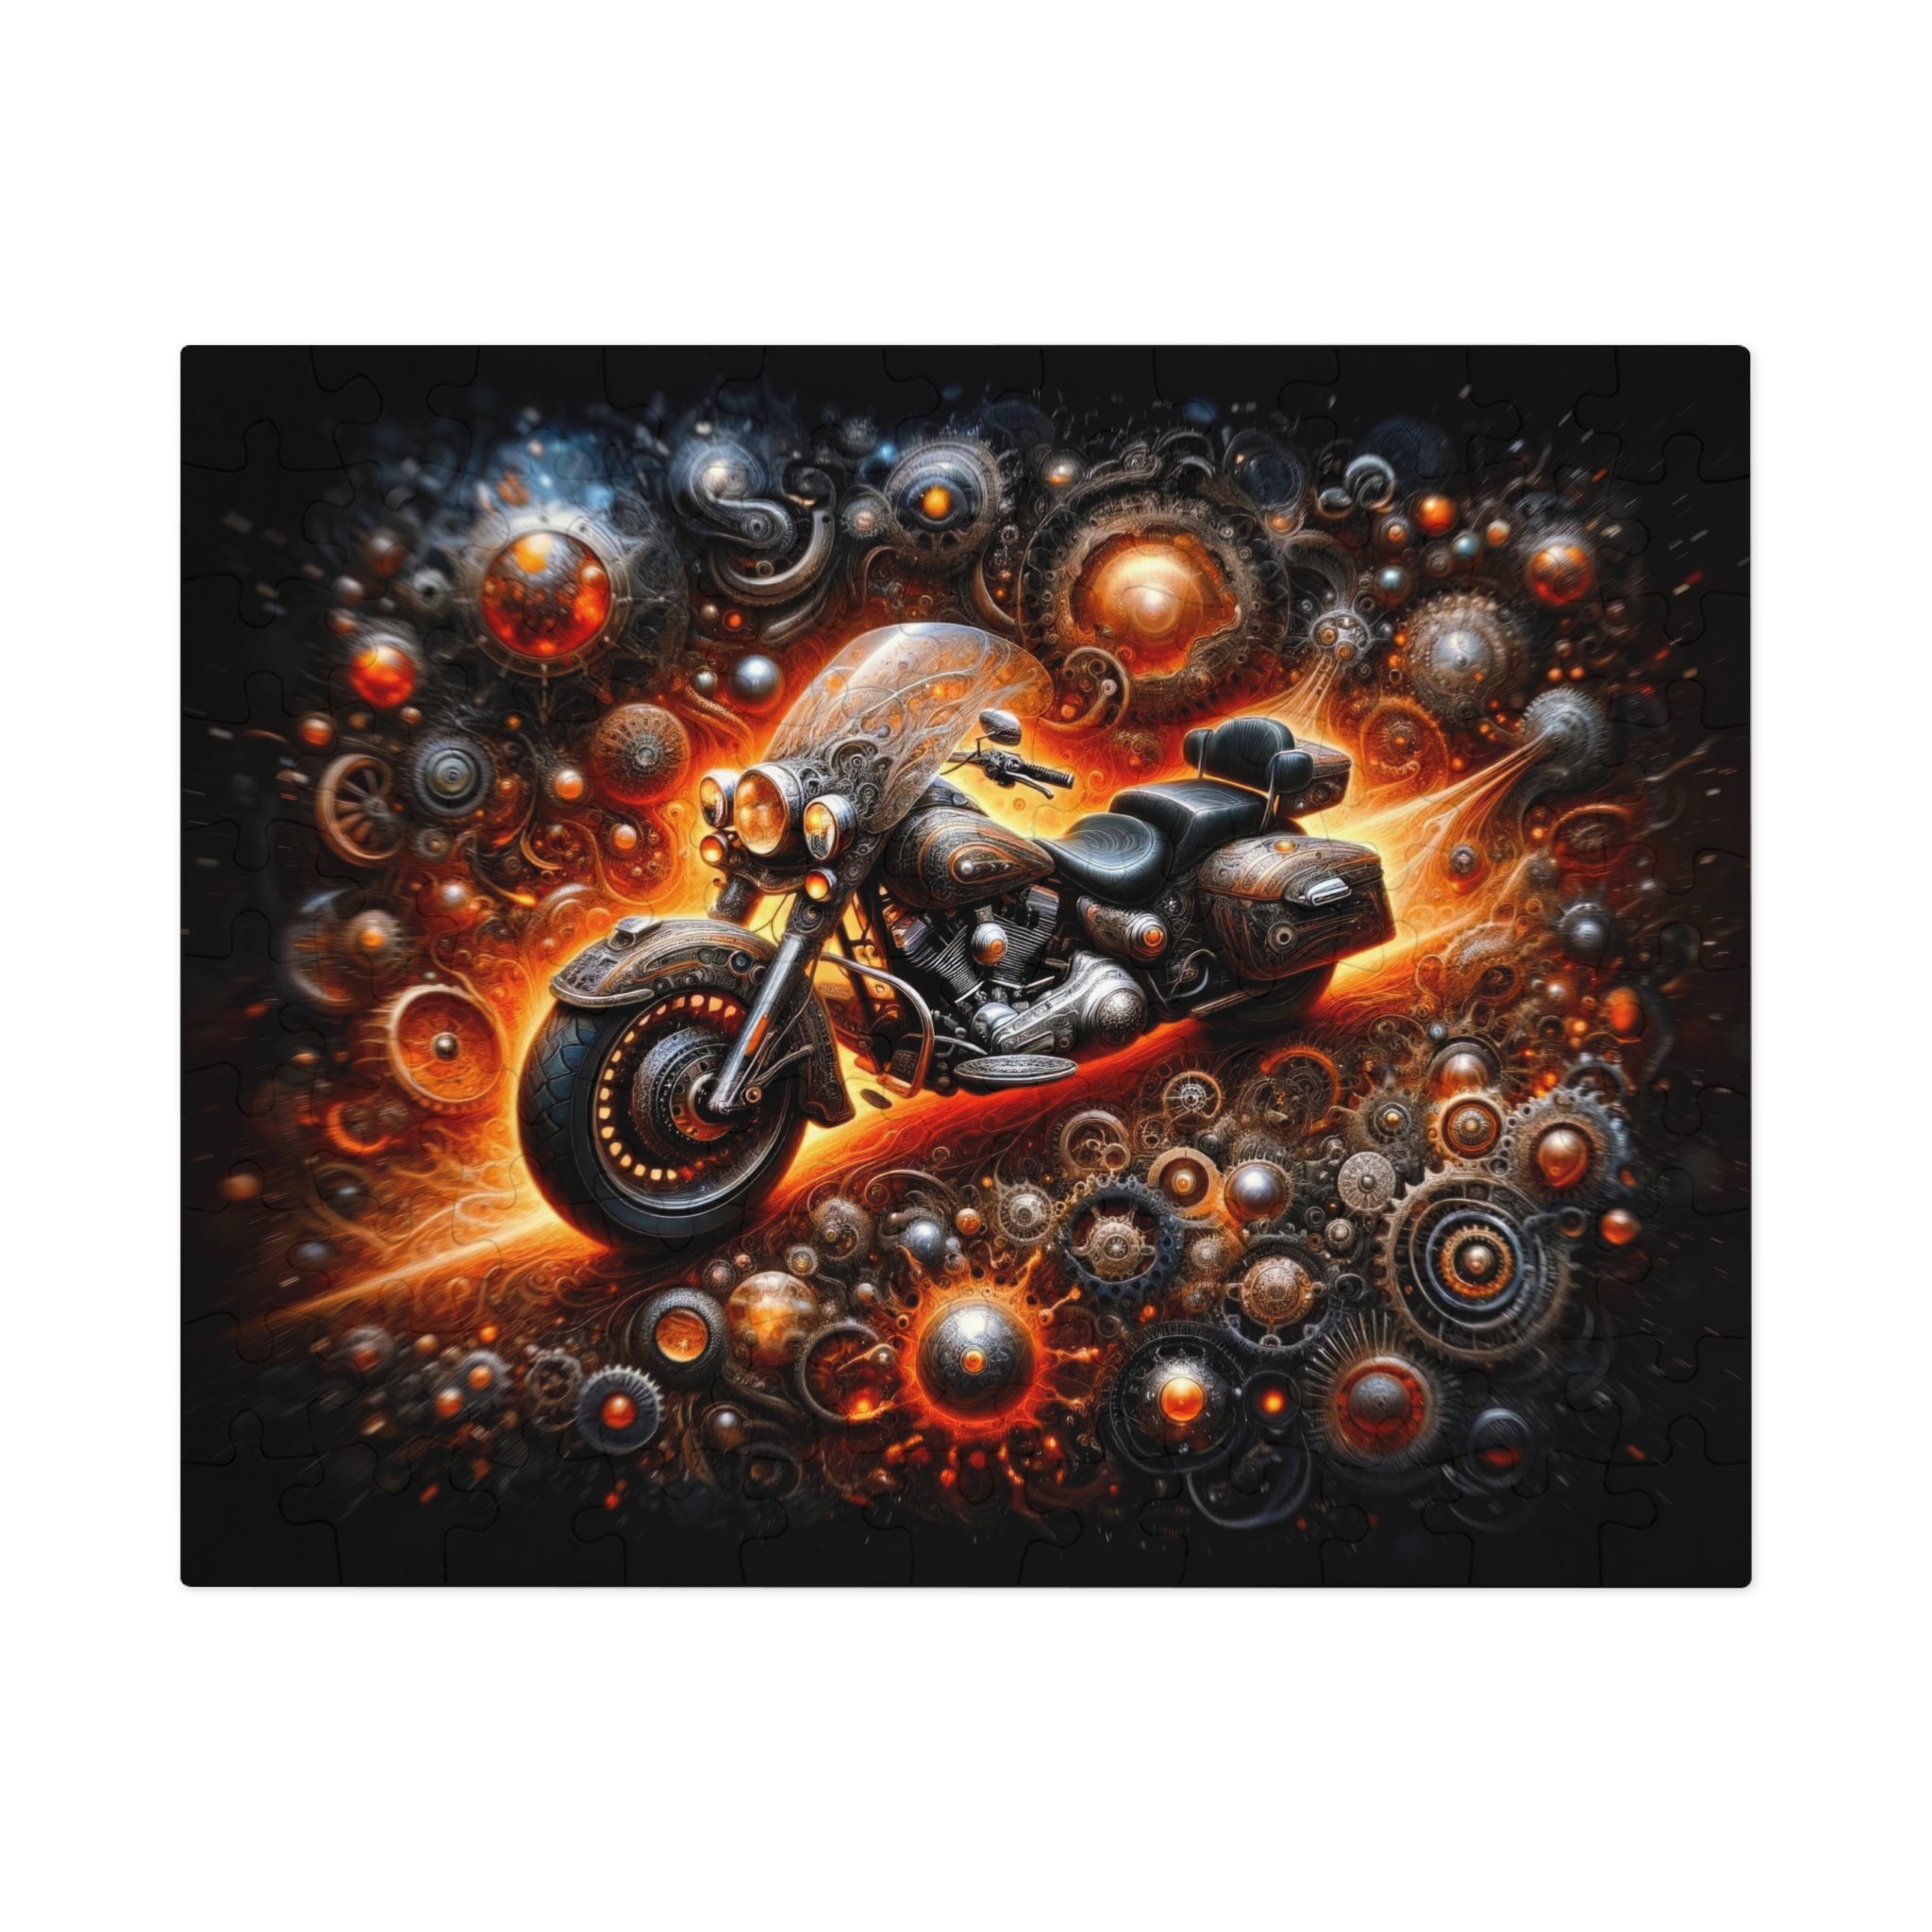 The Engine of Stars Jigsaw Puzzle